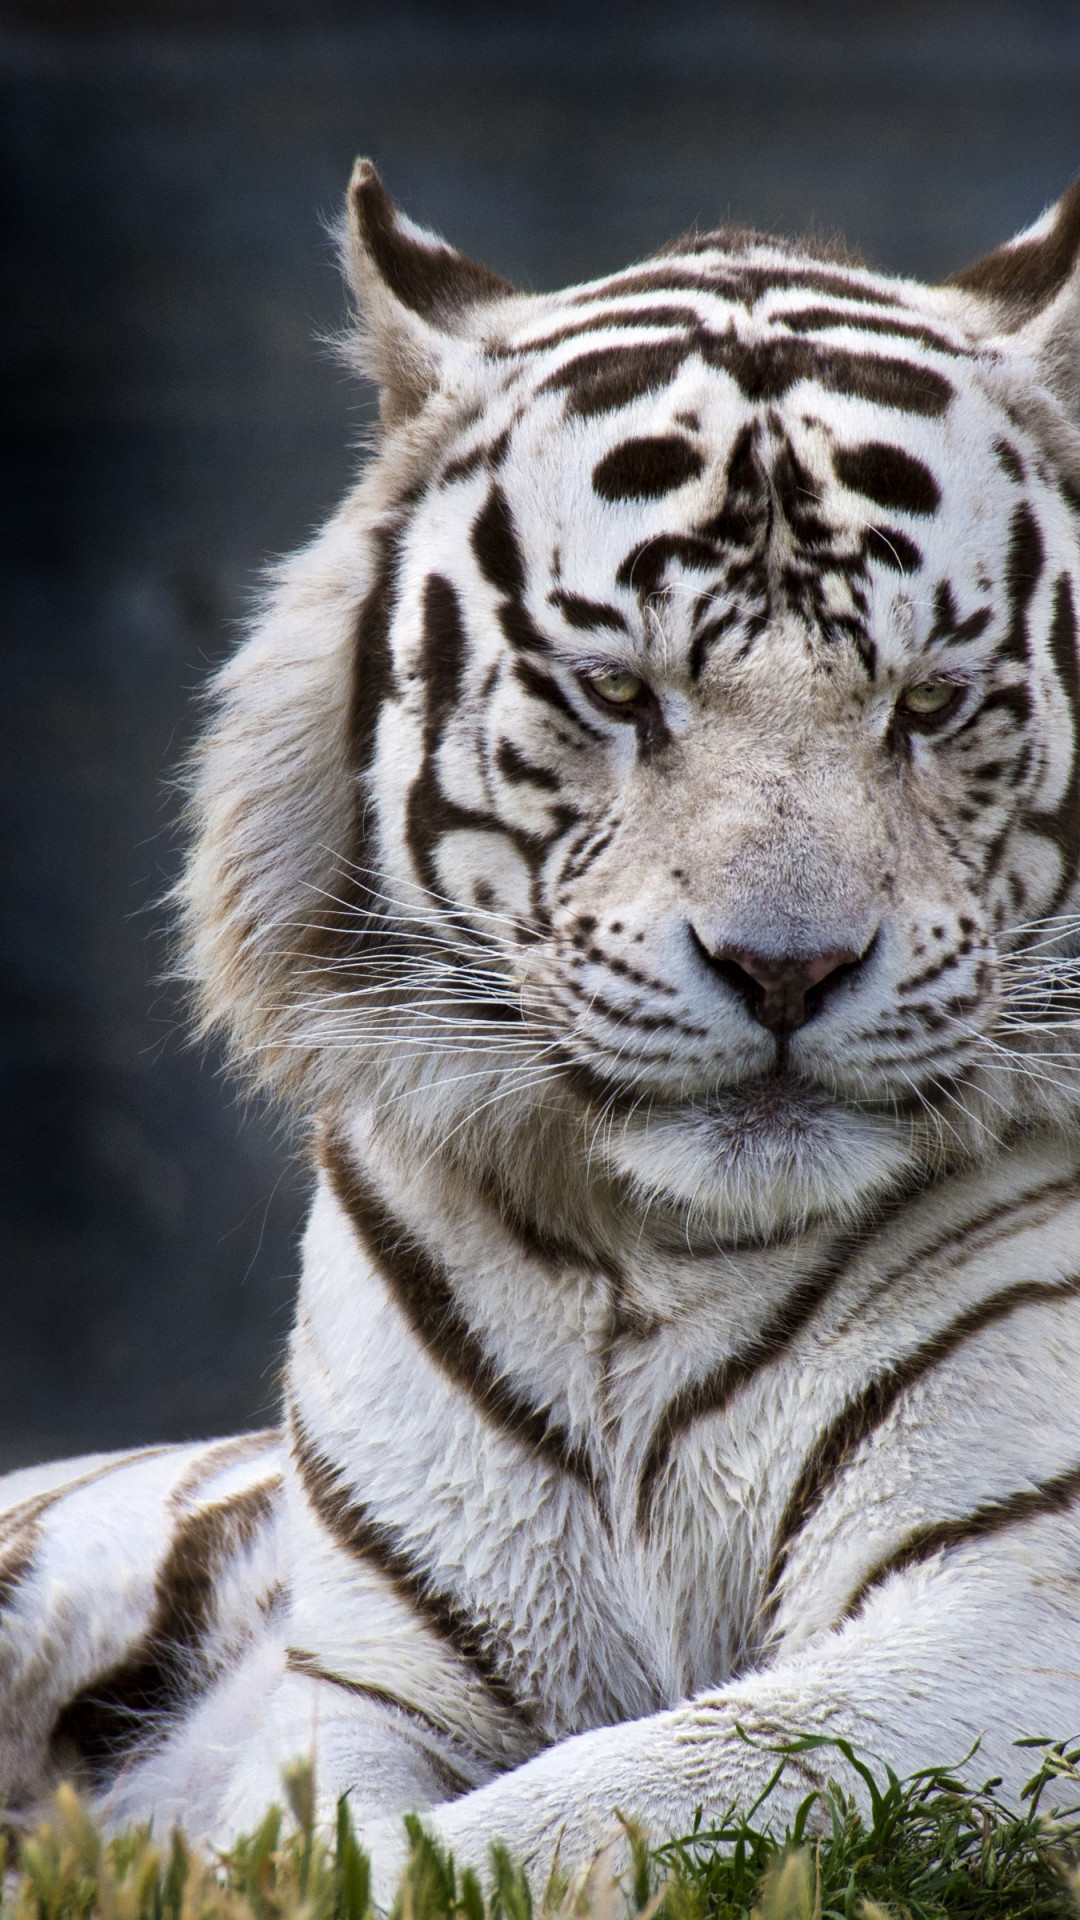 The white tiger from Madrid Zoo wallpaper 1080x1920